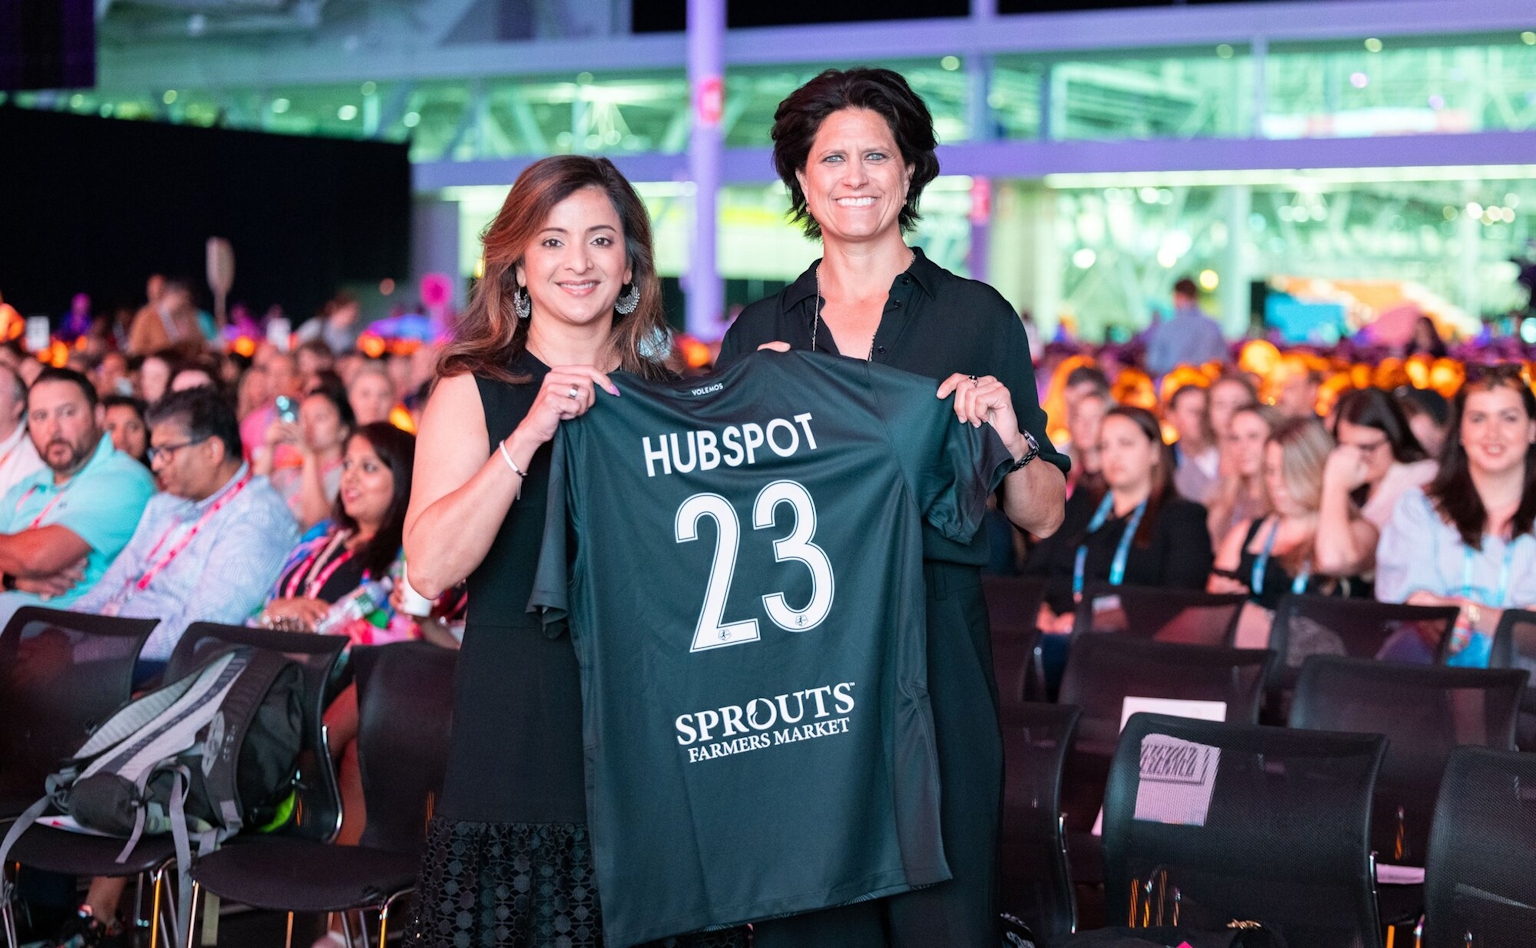 Two people presenting a sports jersey. It says "Hubspot" with the number 23."